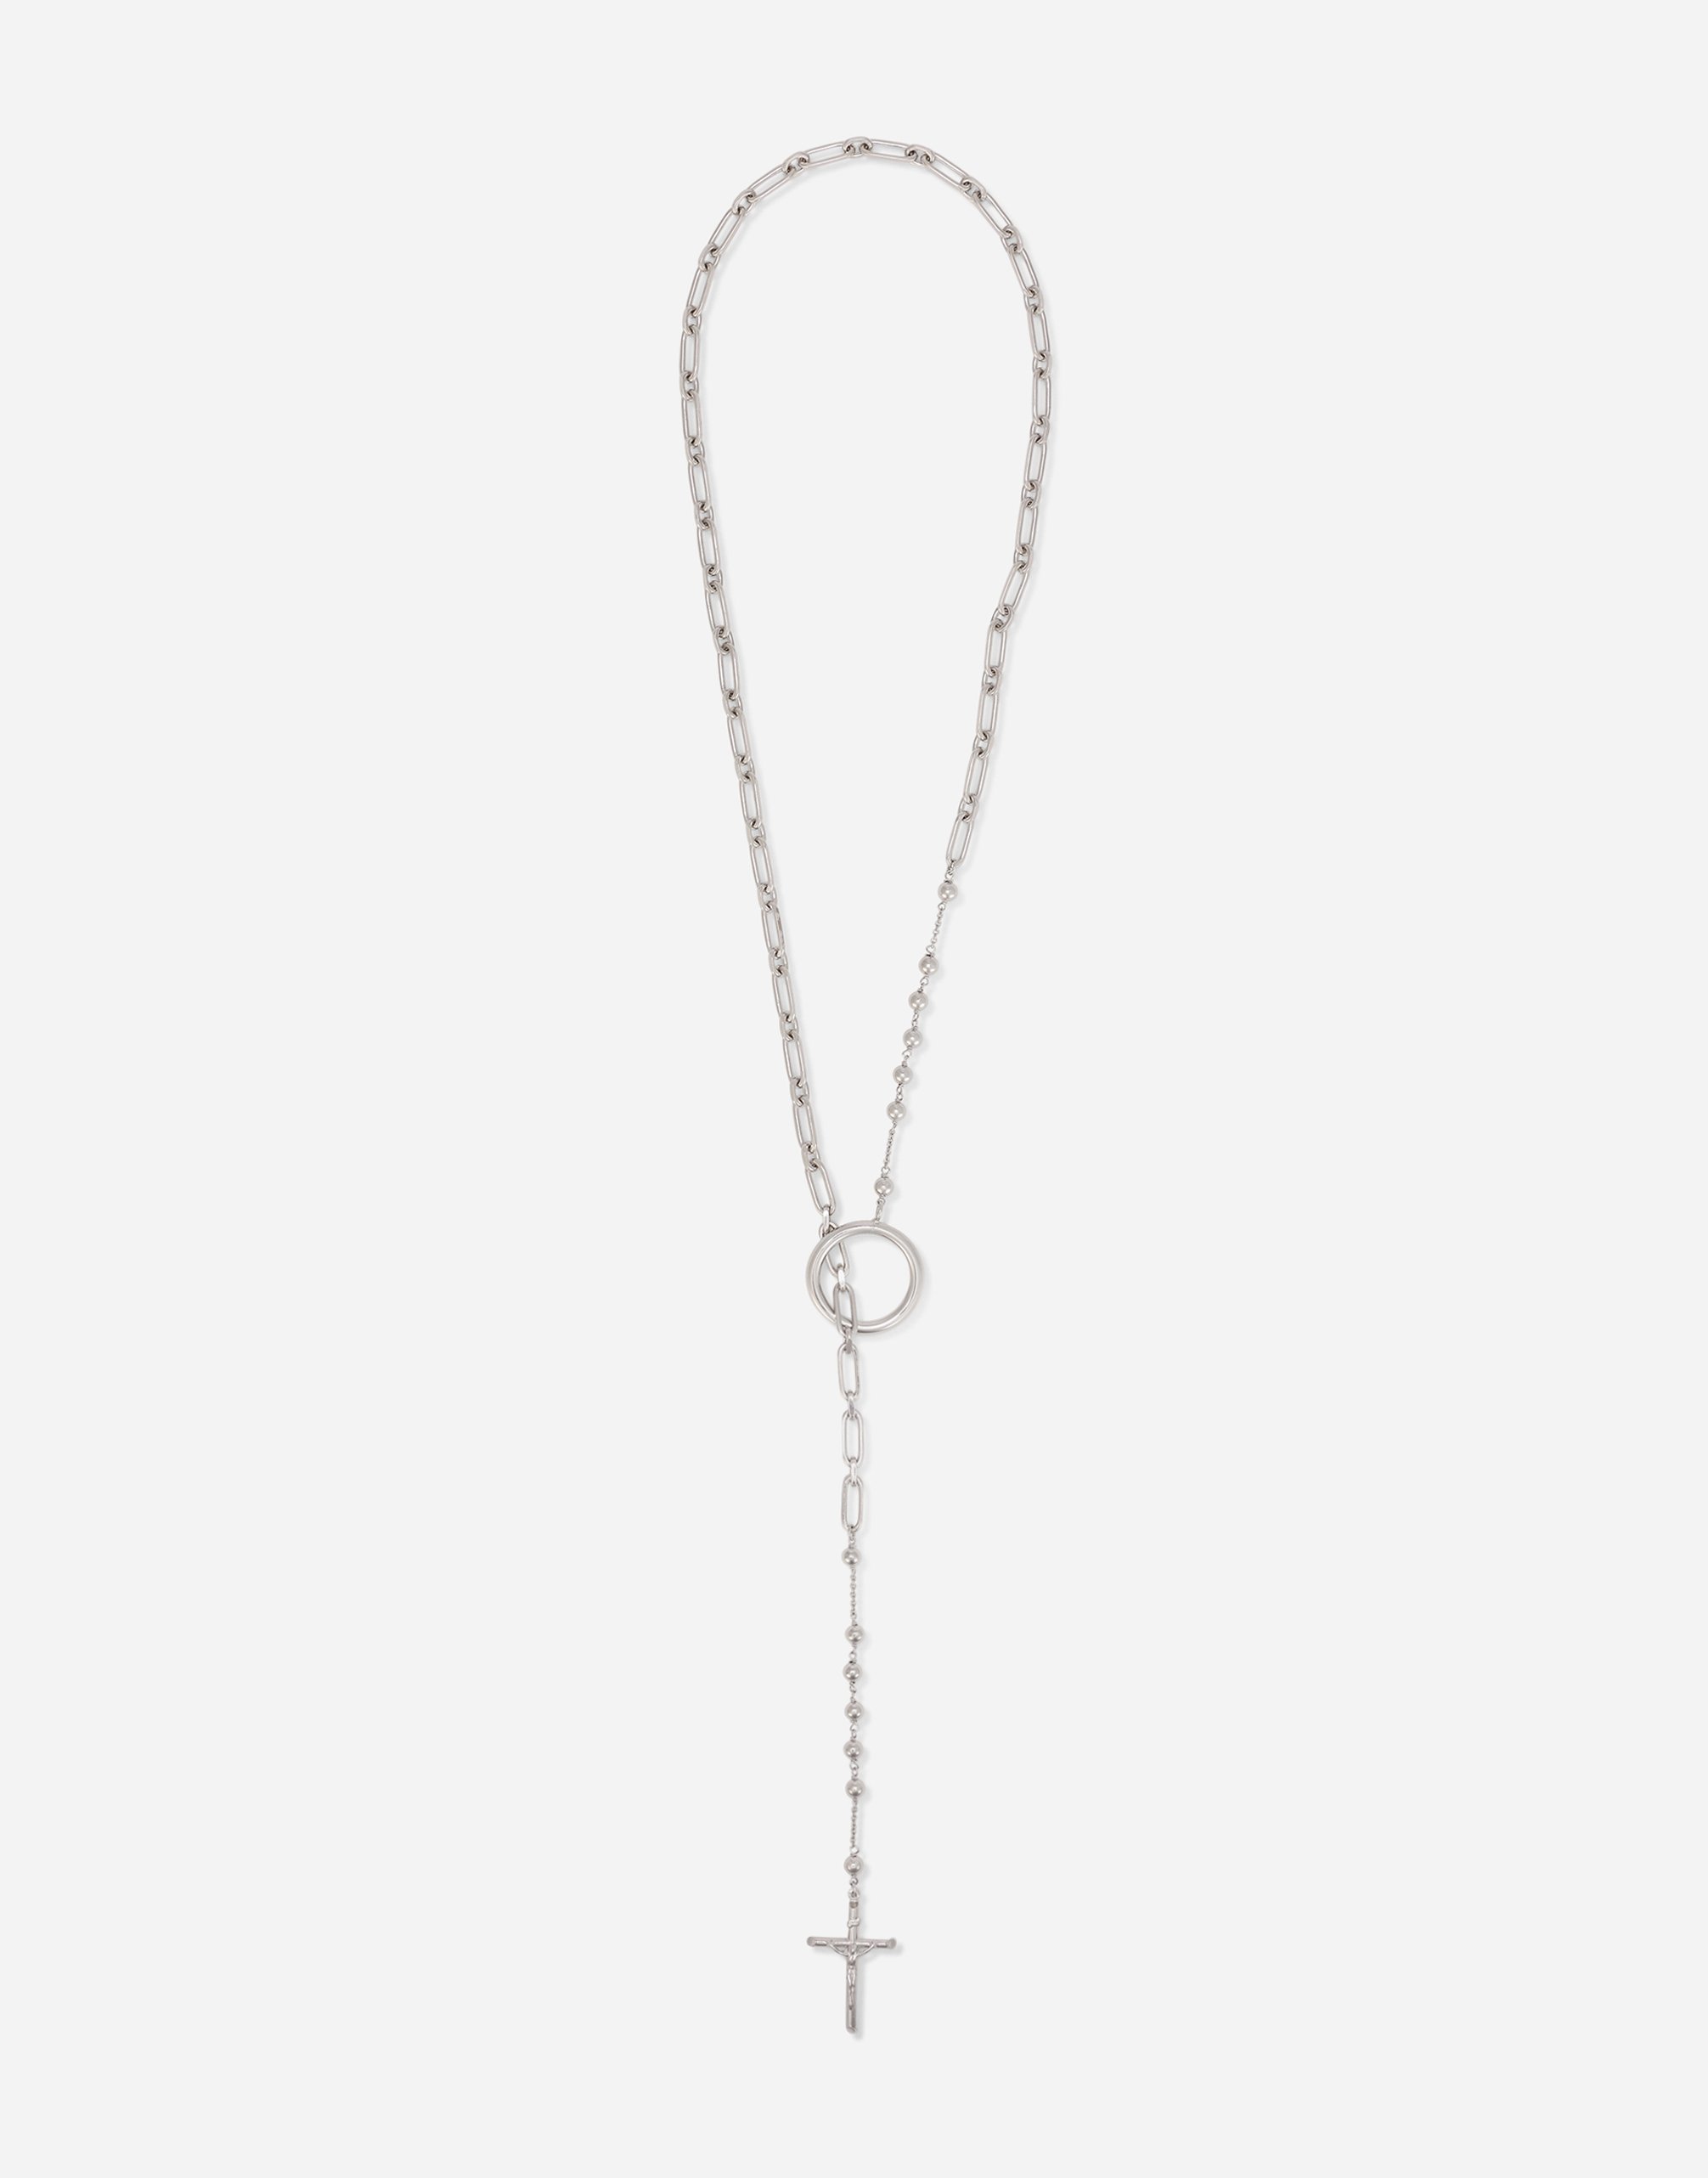 Cross necklace in Silver